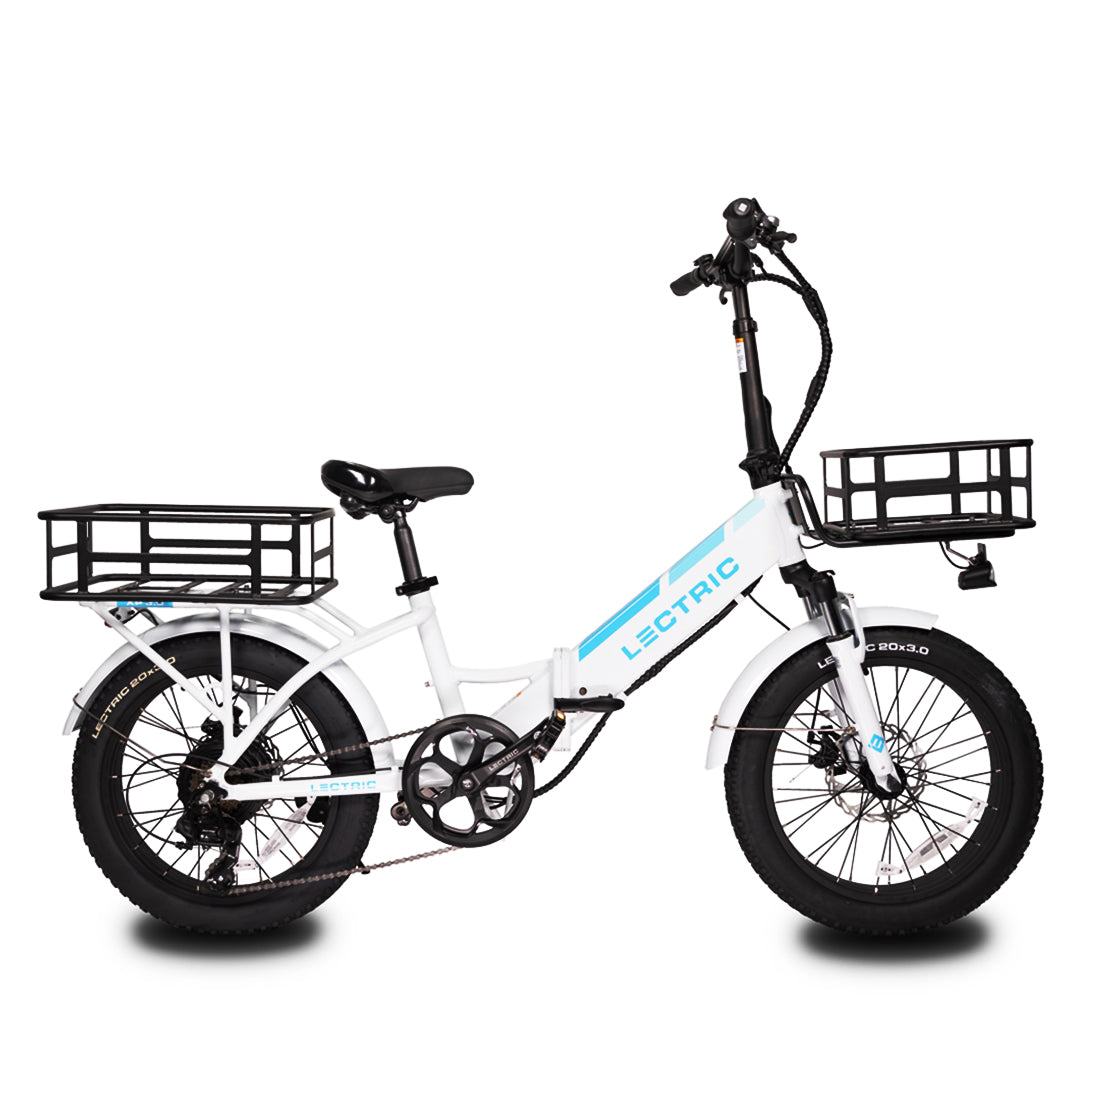 Class 3 eBike with front basket and rear basket